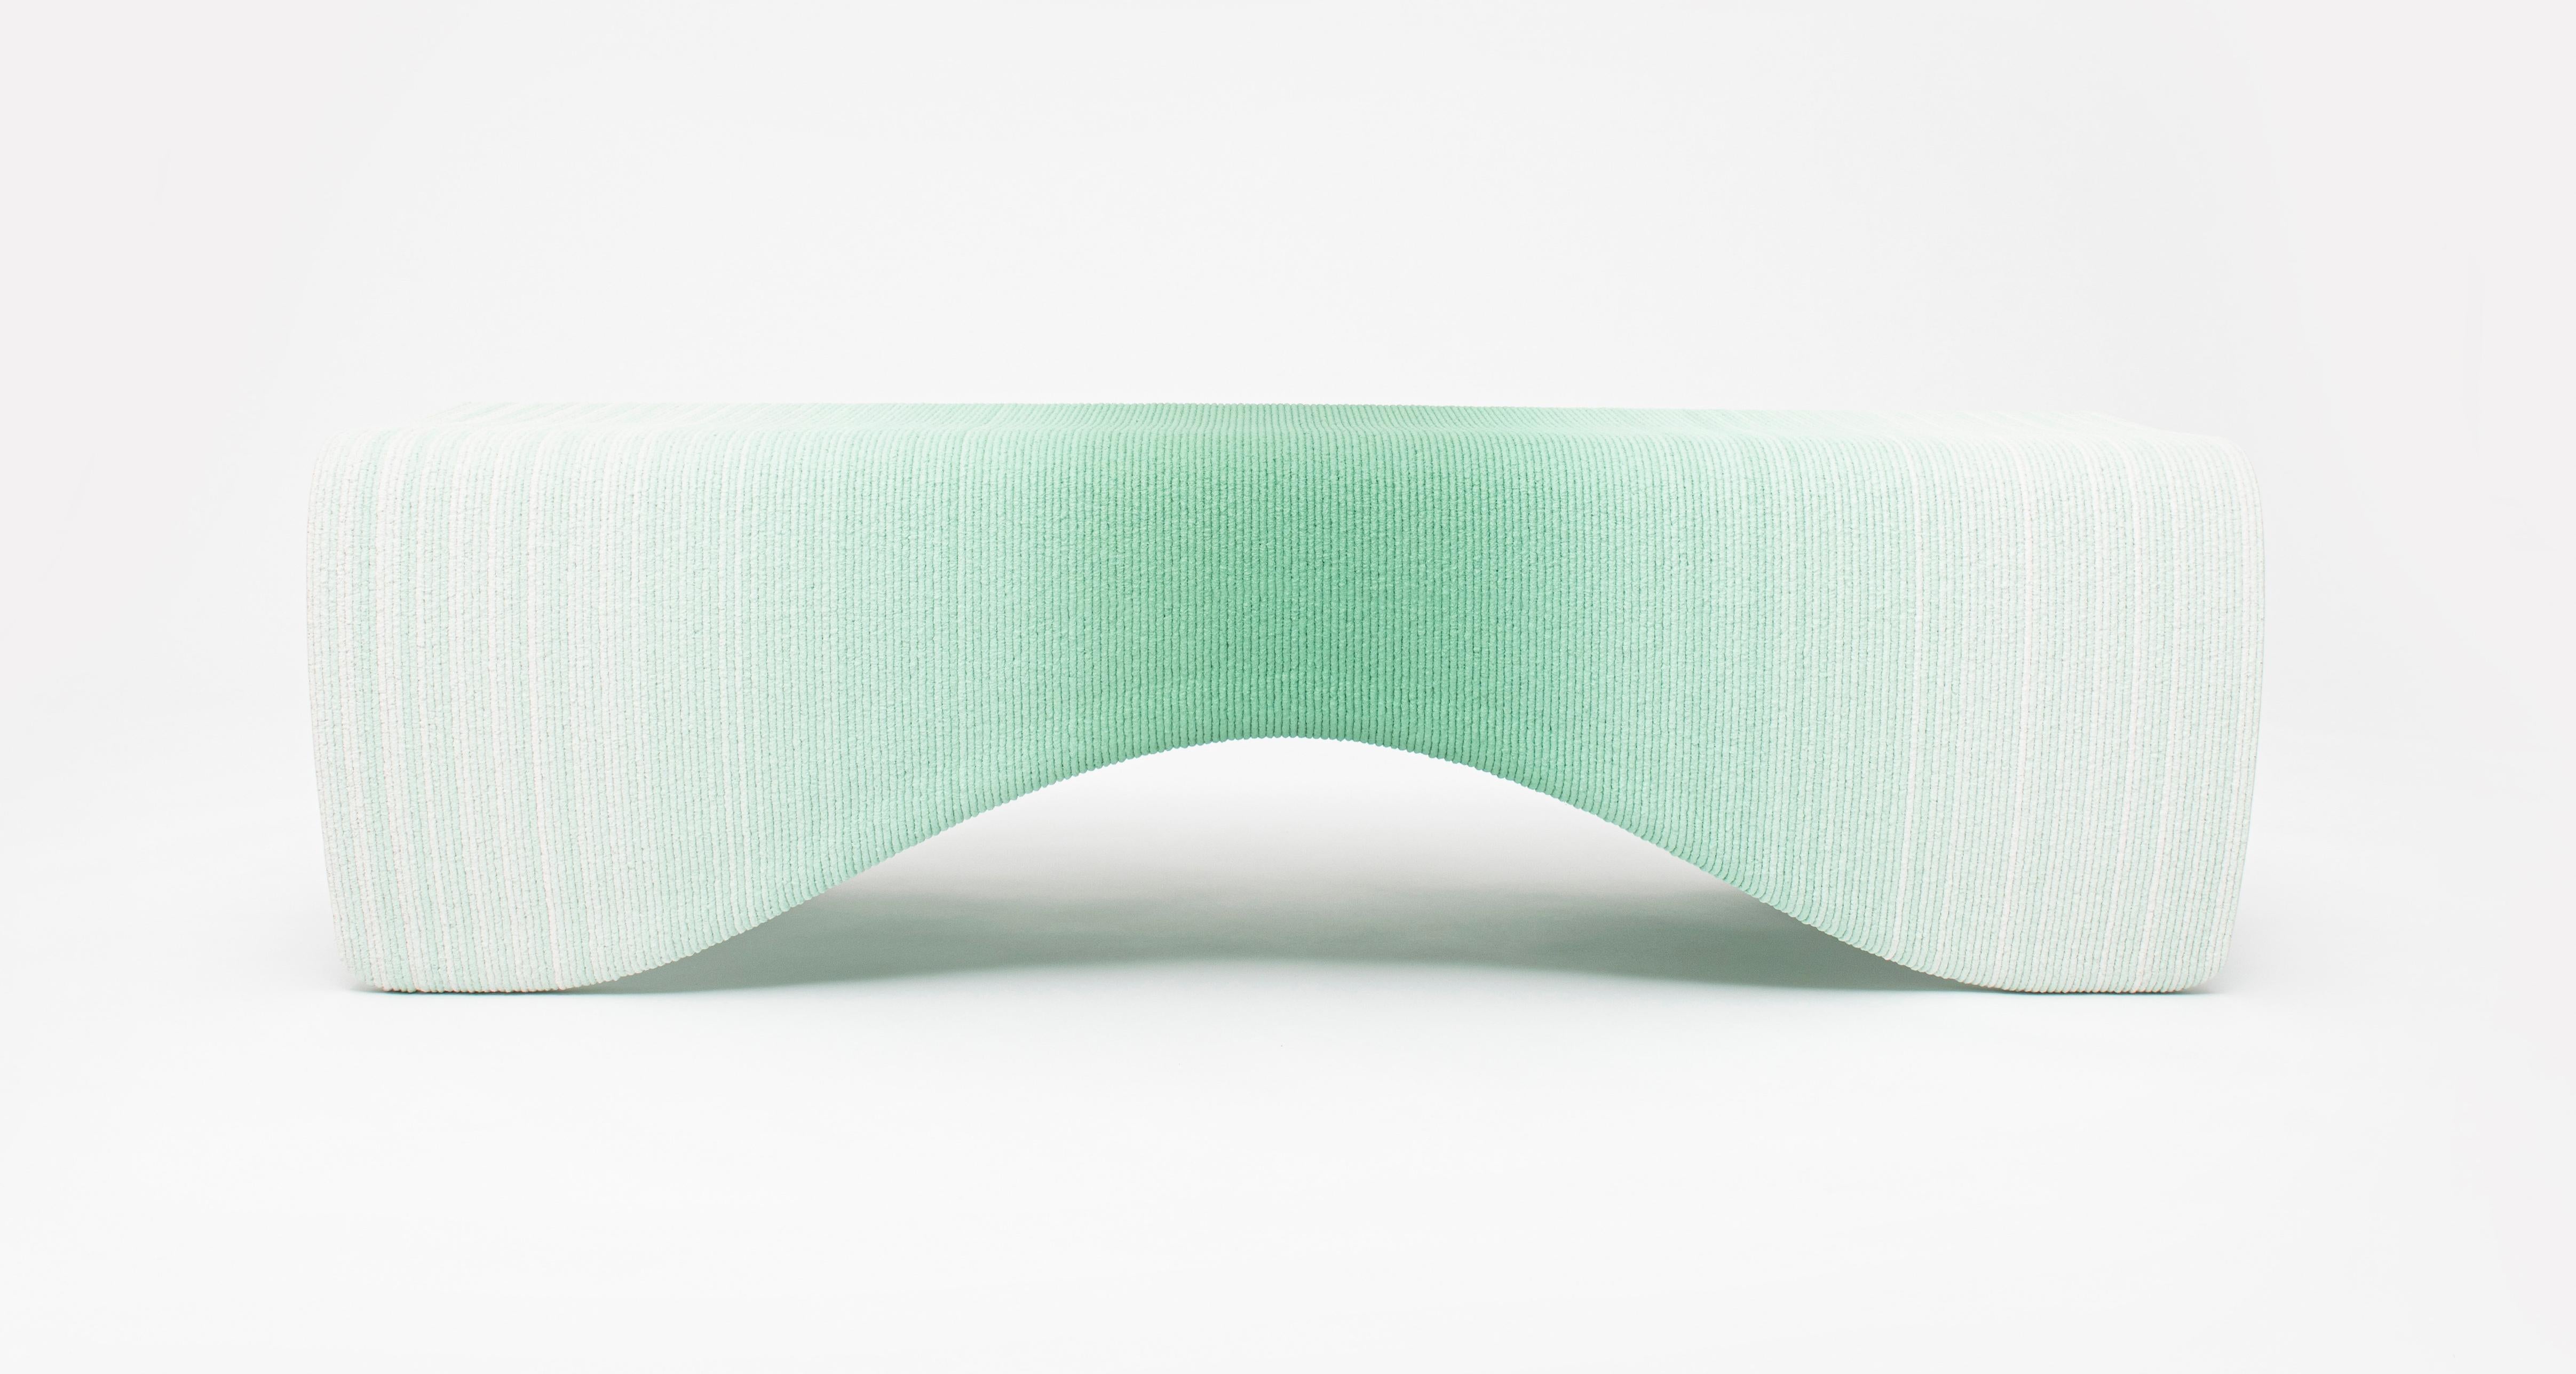 Small Gradient bench by Philipp Aduatz
Limited Edition of 50
Dimensions: 149 x 56 x 45 cm
Materials: 3D printed concrete dyed, reinforced with steel

The 3D printed gradient furniture collection is Philipp Aduatz latest project in the field of